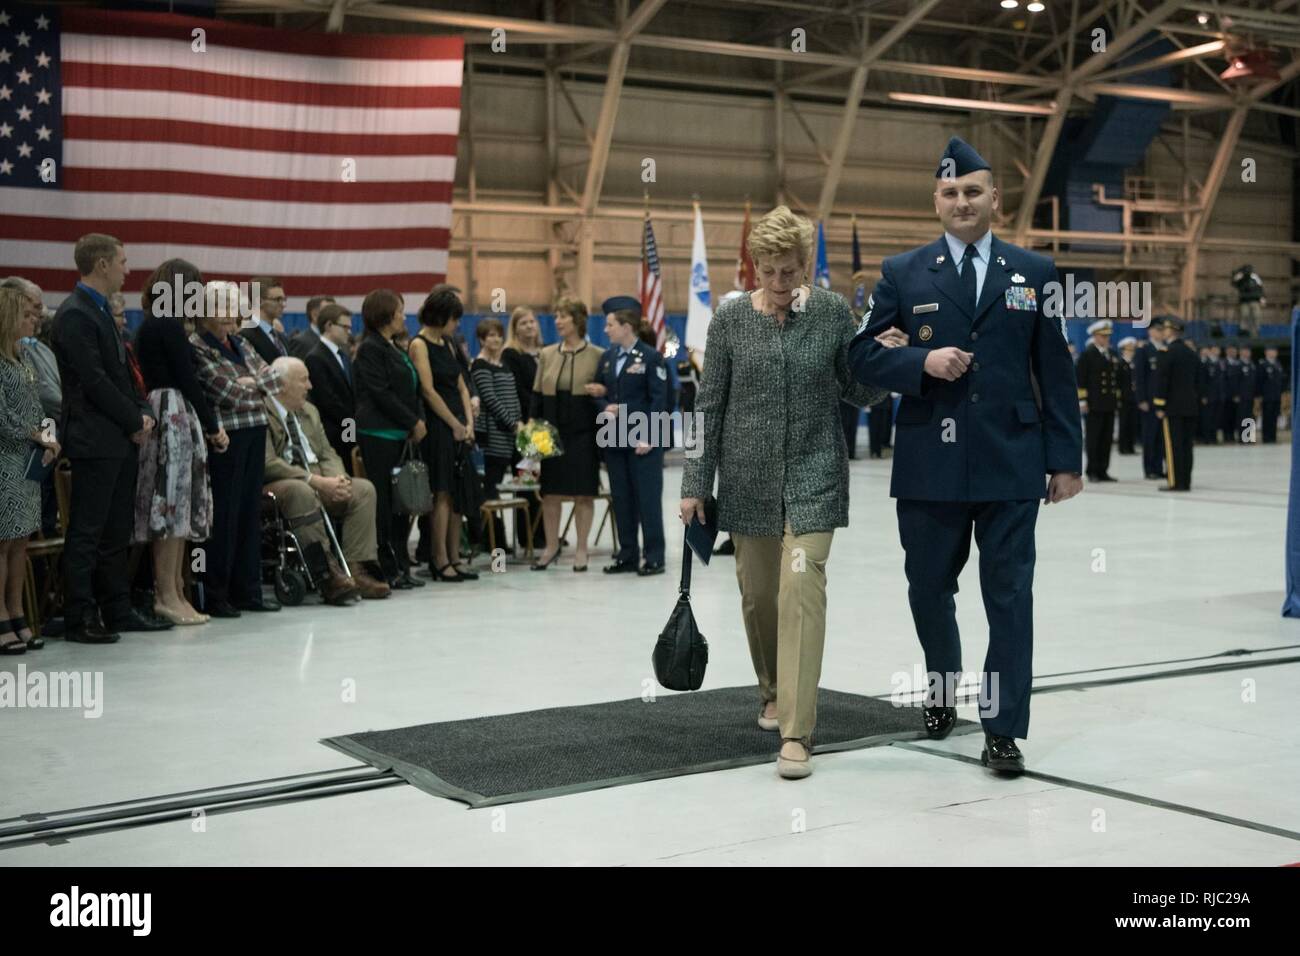 Ellyn Dunford, wife of Marine Gen. Joseph F. Dunford Jr., chairman of the Joint Chiefs of Staff, departs the Strategic Command change of command ceremony at Offutt Air Force Base, Omaha, Nebraska Nov. 3, 2016.  Air Force Gen. John E. Hyten assumes command from Navy Adm. Cecil D. Haney. Stock Photo